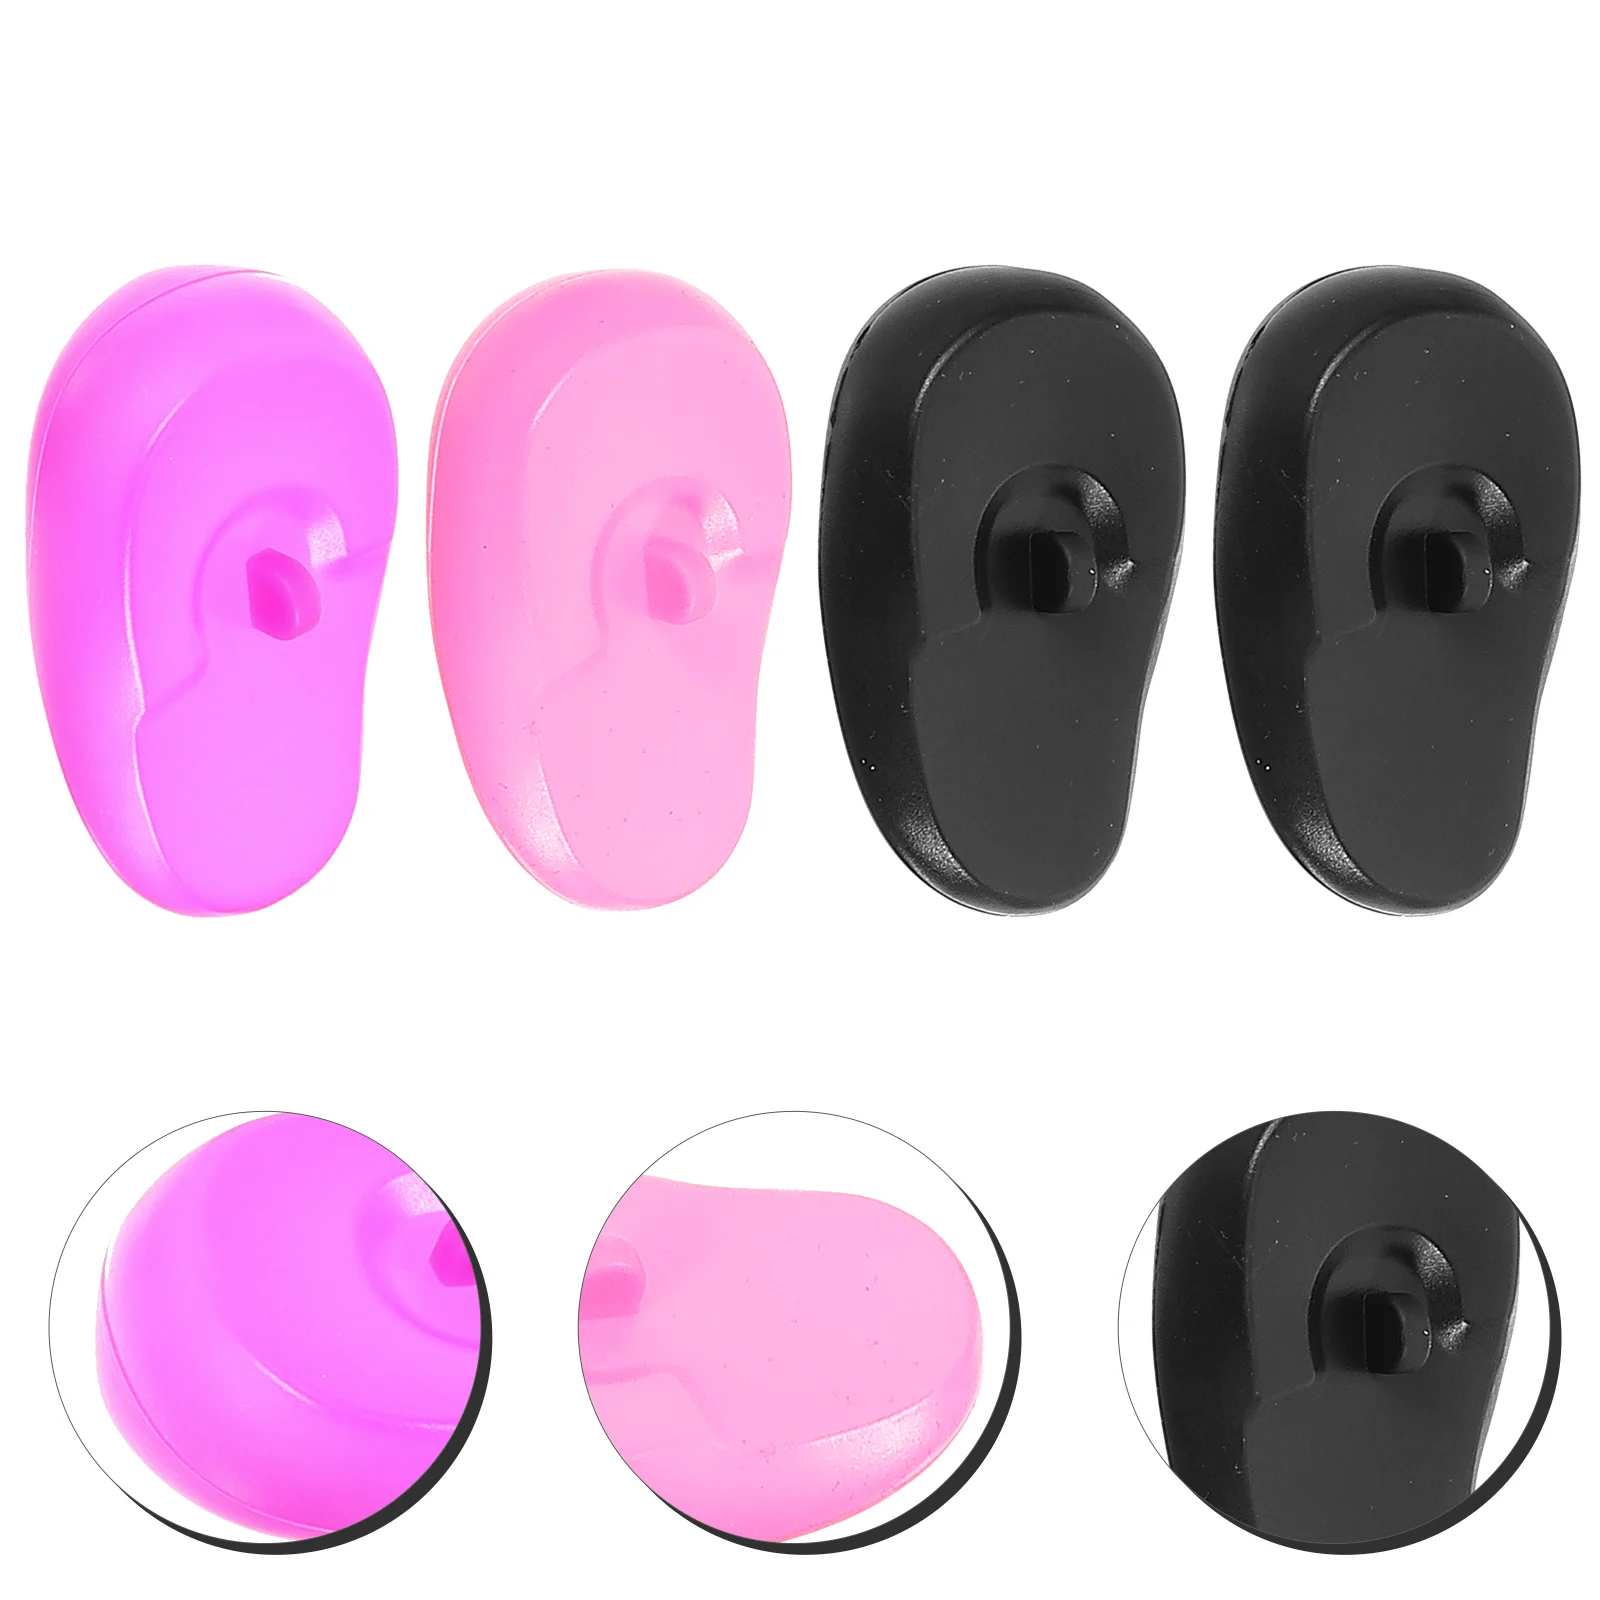 

Hair Dye Earmuffs Dyeing Supplies Silicone Protection Accessories Coloring Cover Caps Unisex Covers Showering Dying Dryer